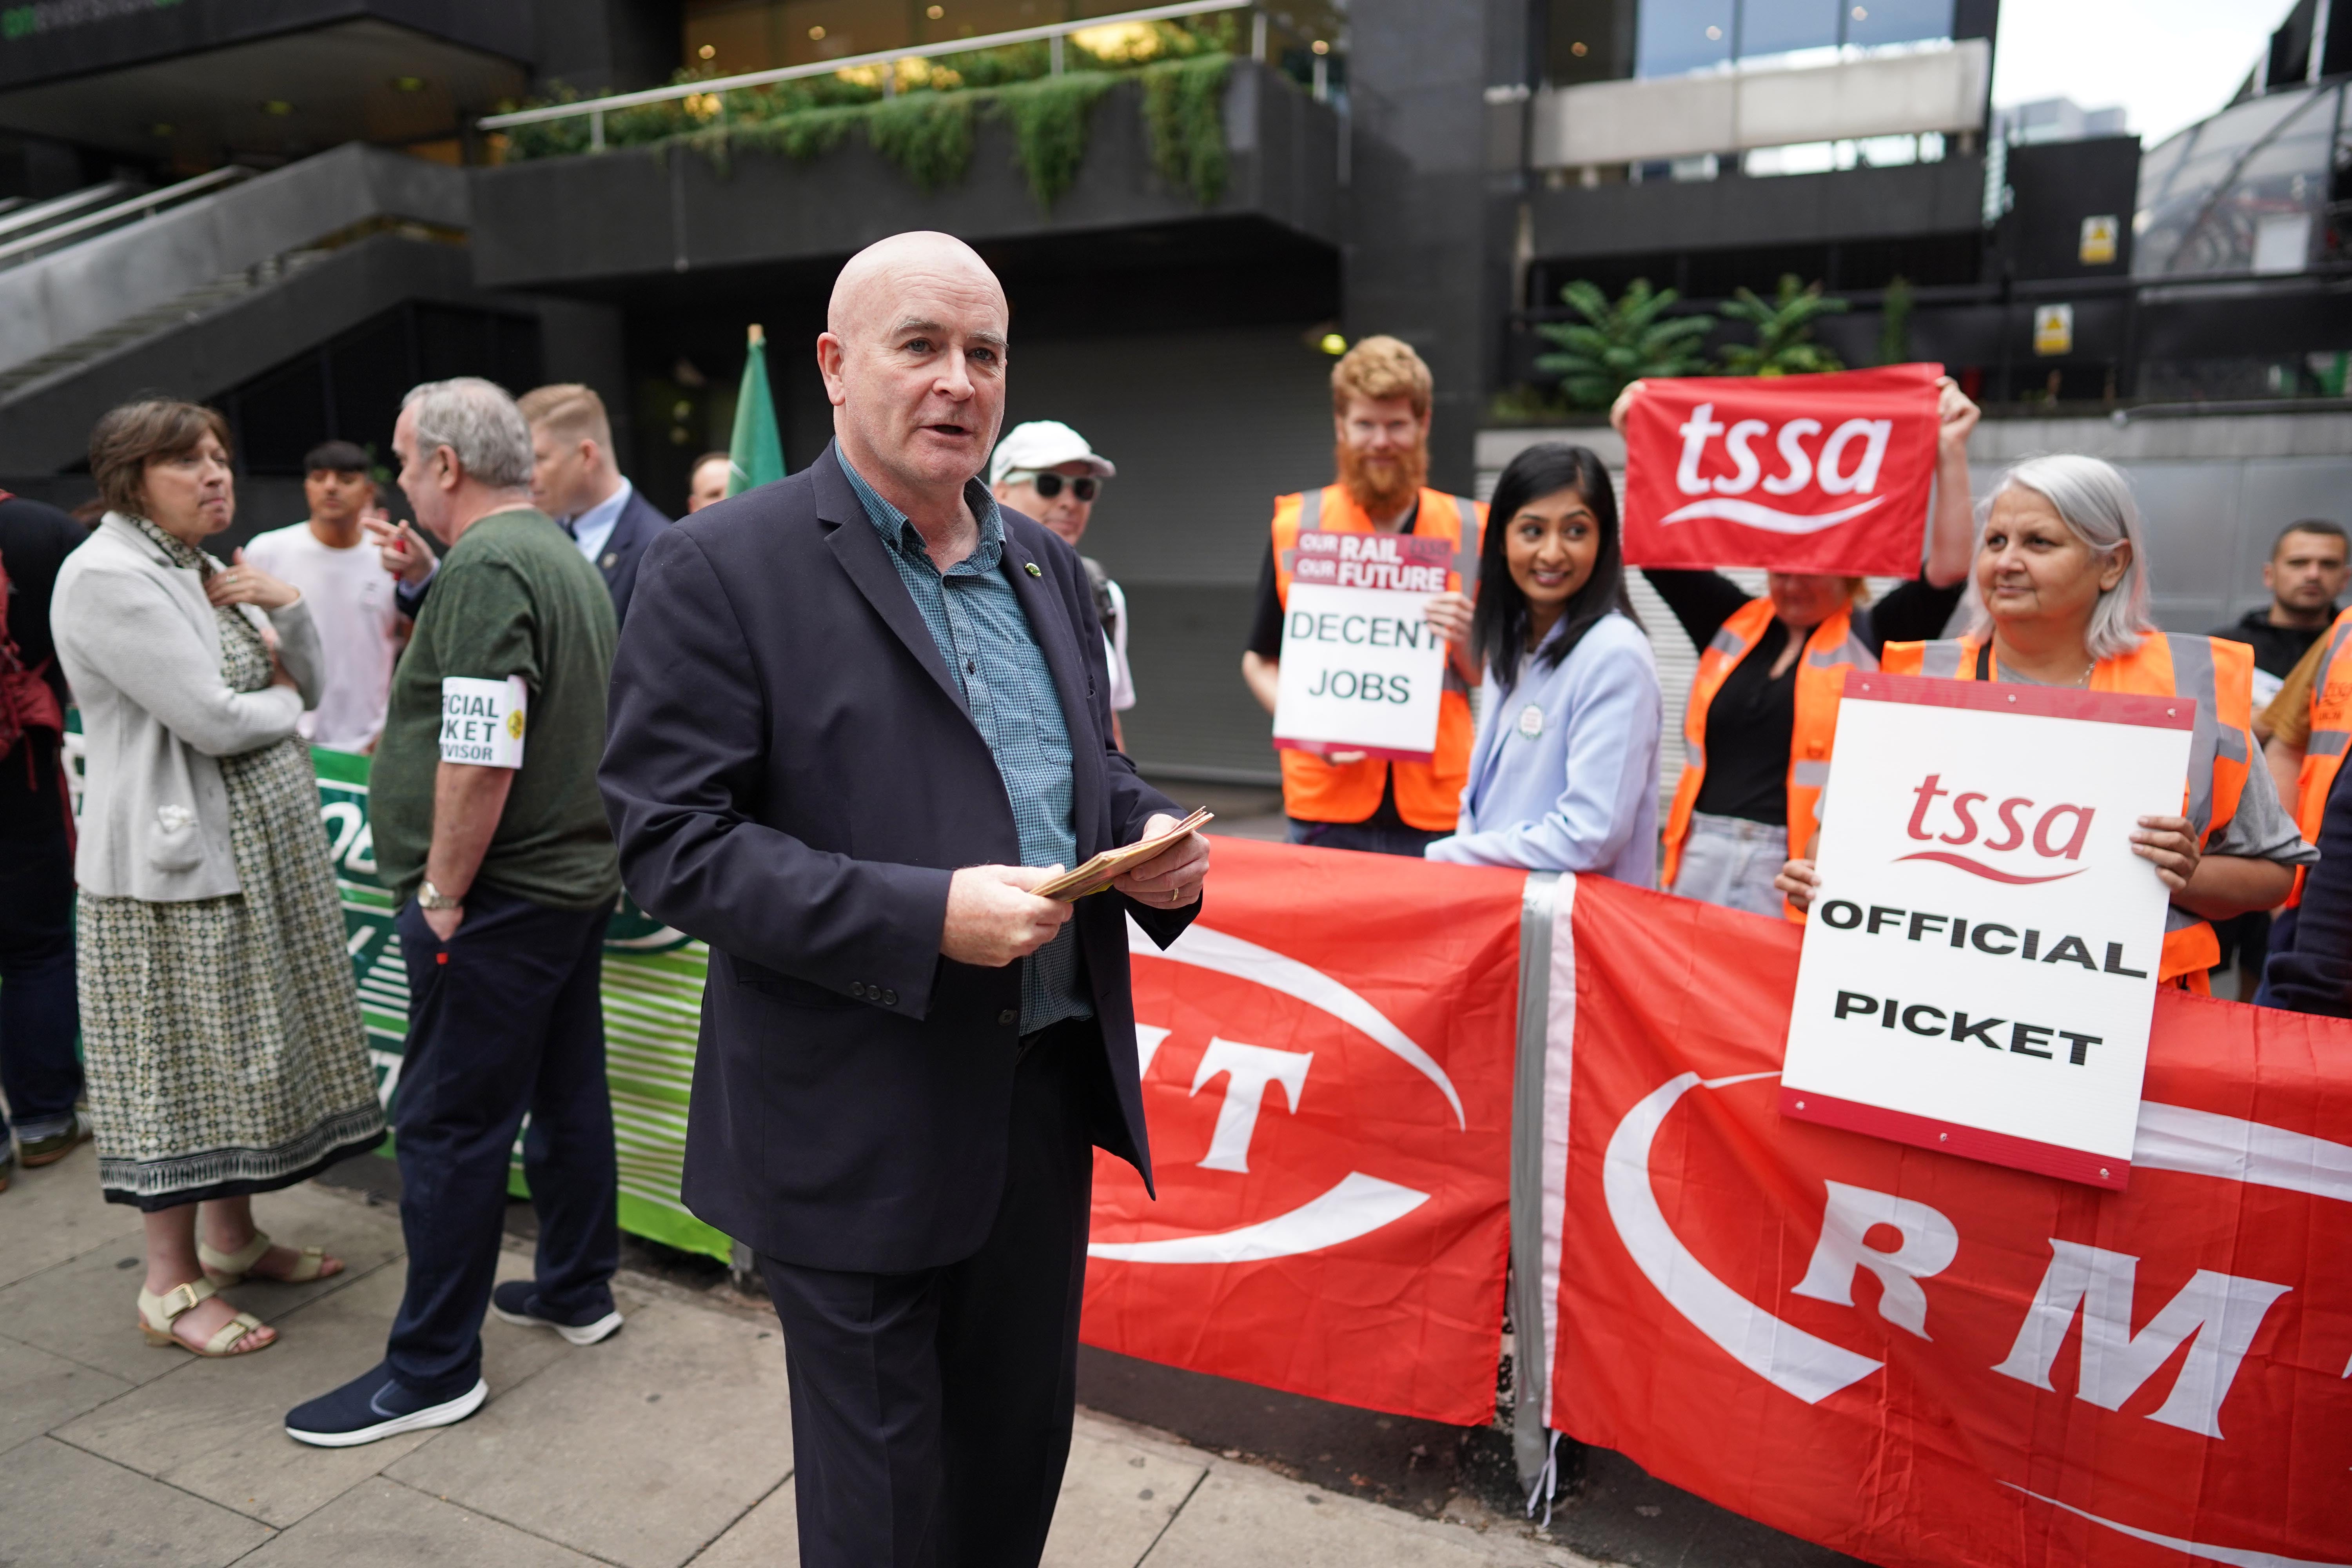 Mick Lynch, general secretary of the Rail, Maritime and Transport union, on the picket line (Stefan Rousseau/PA)